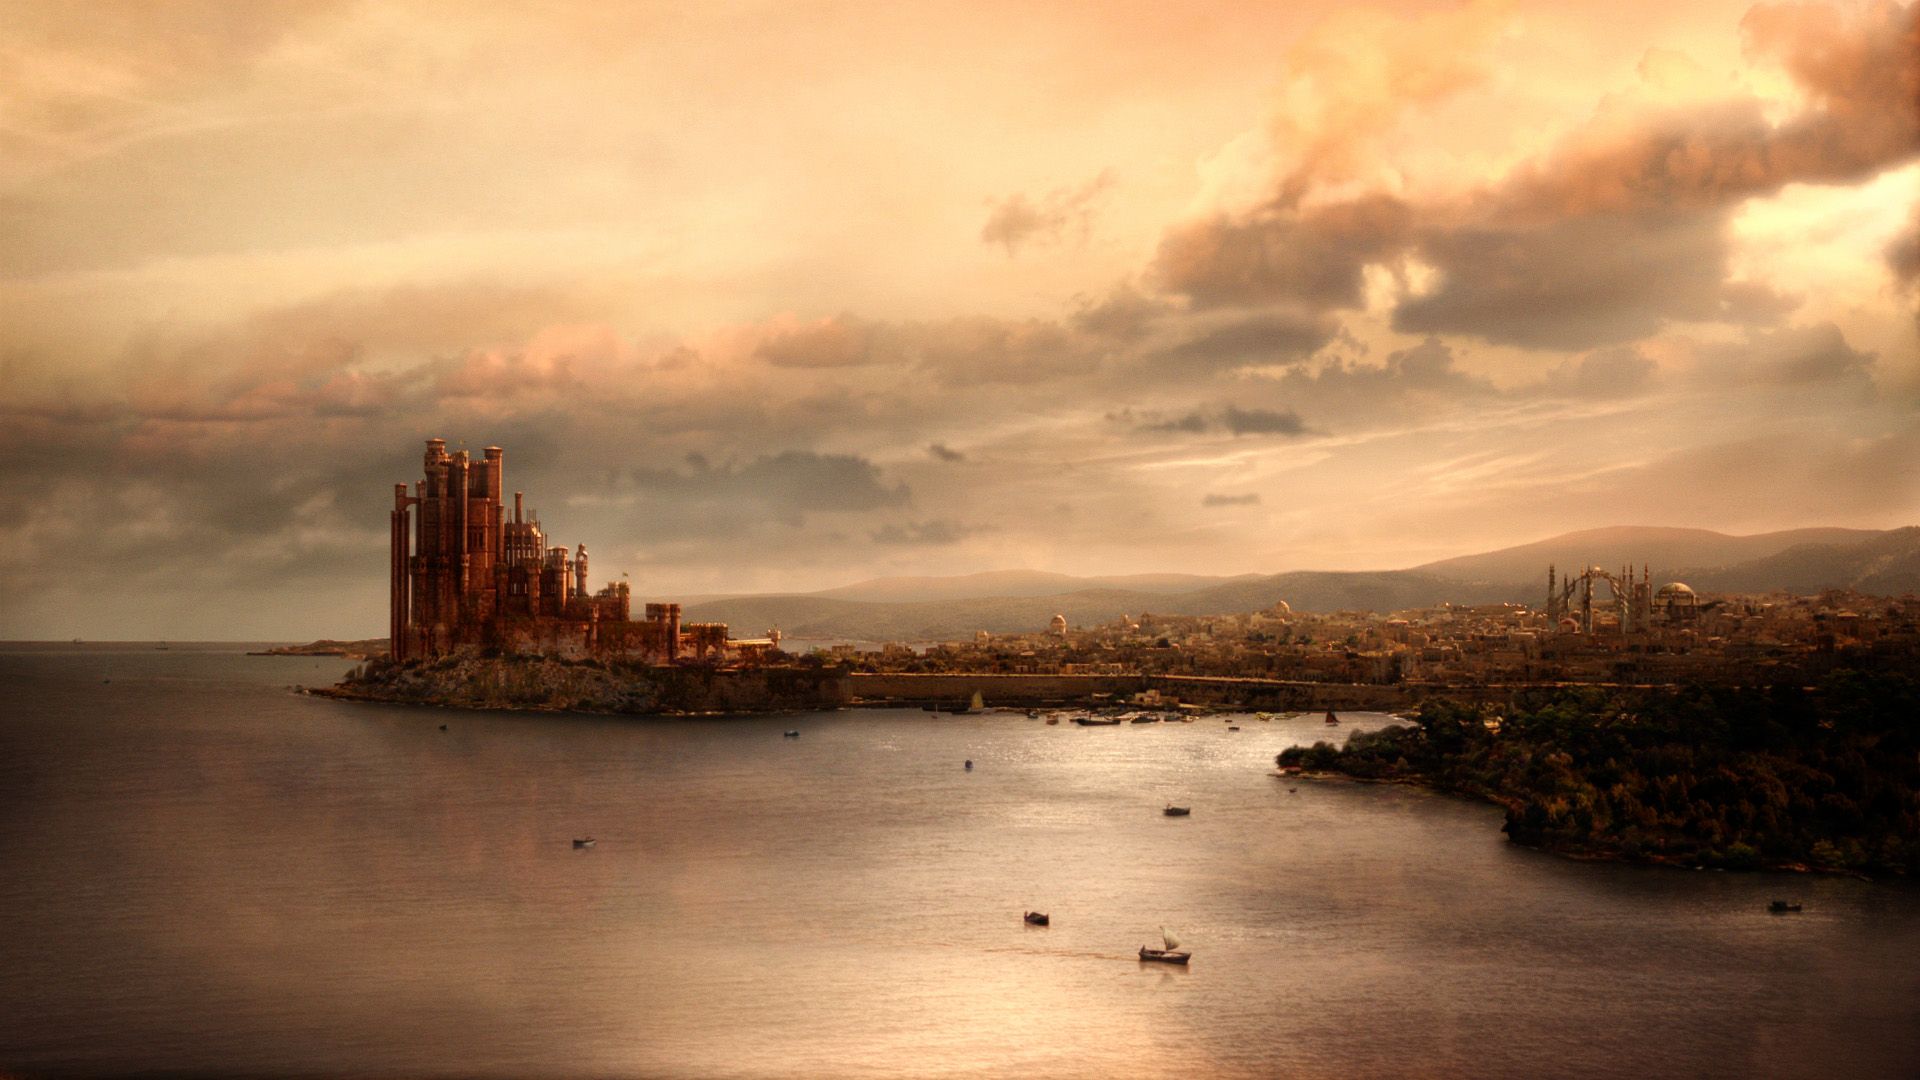 Game of Thrones background